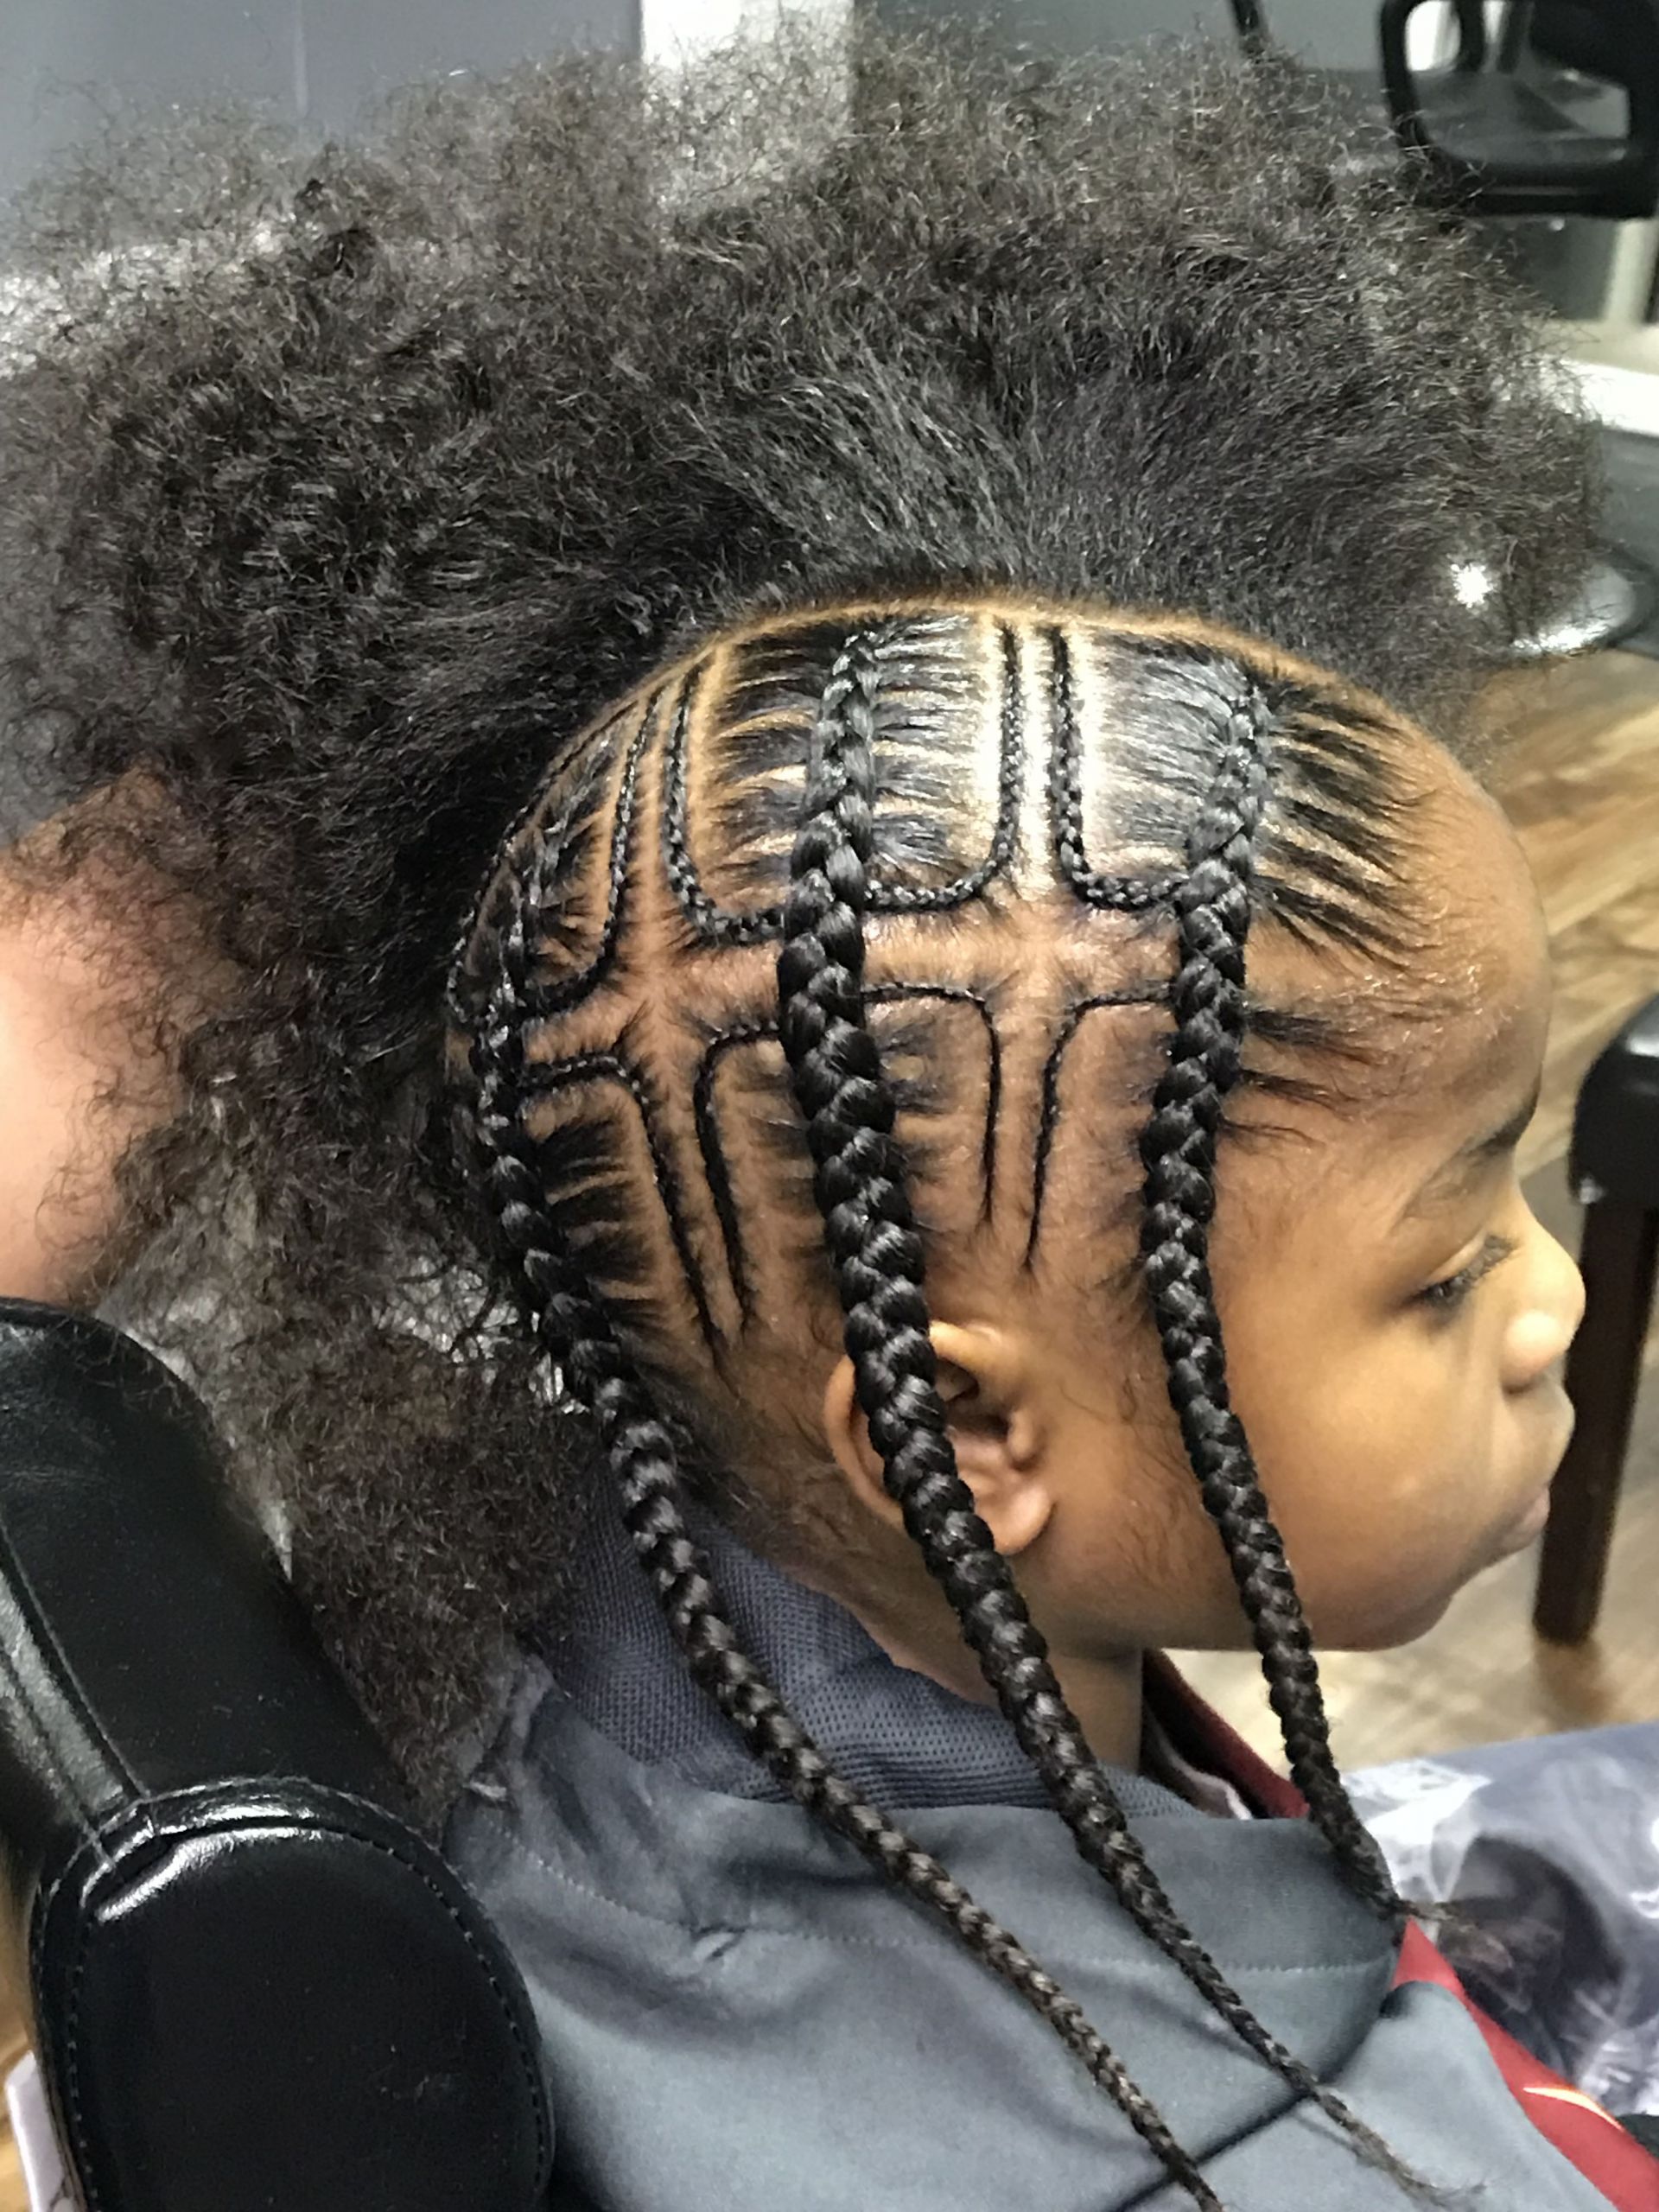 Lil Boy Braid Hairstyles
 Pin by RelaxBeeNatural on RelaxBeeNatural in 2019